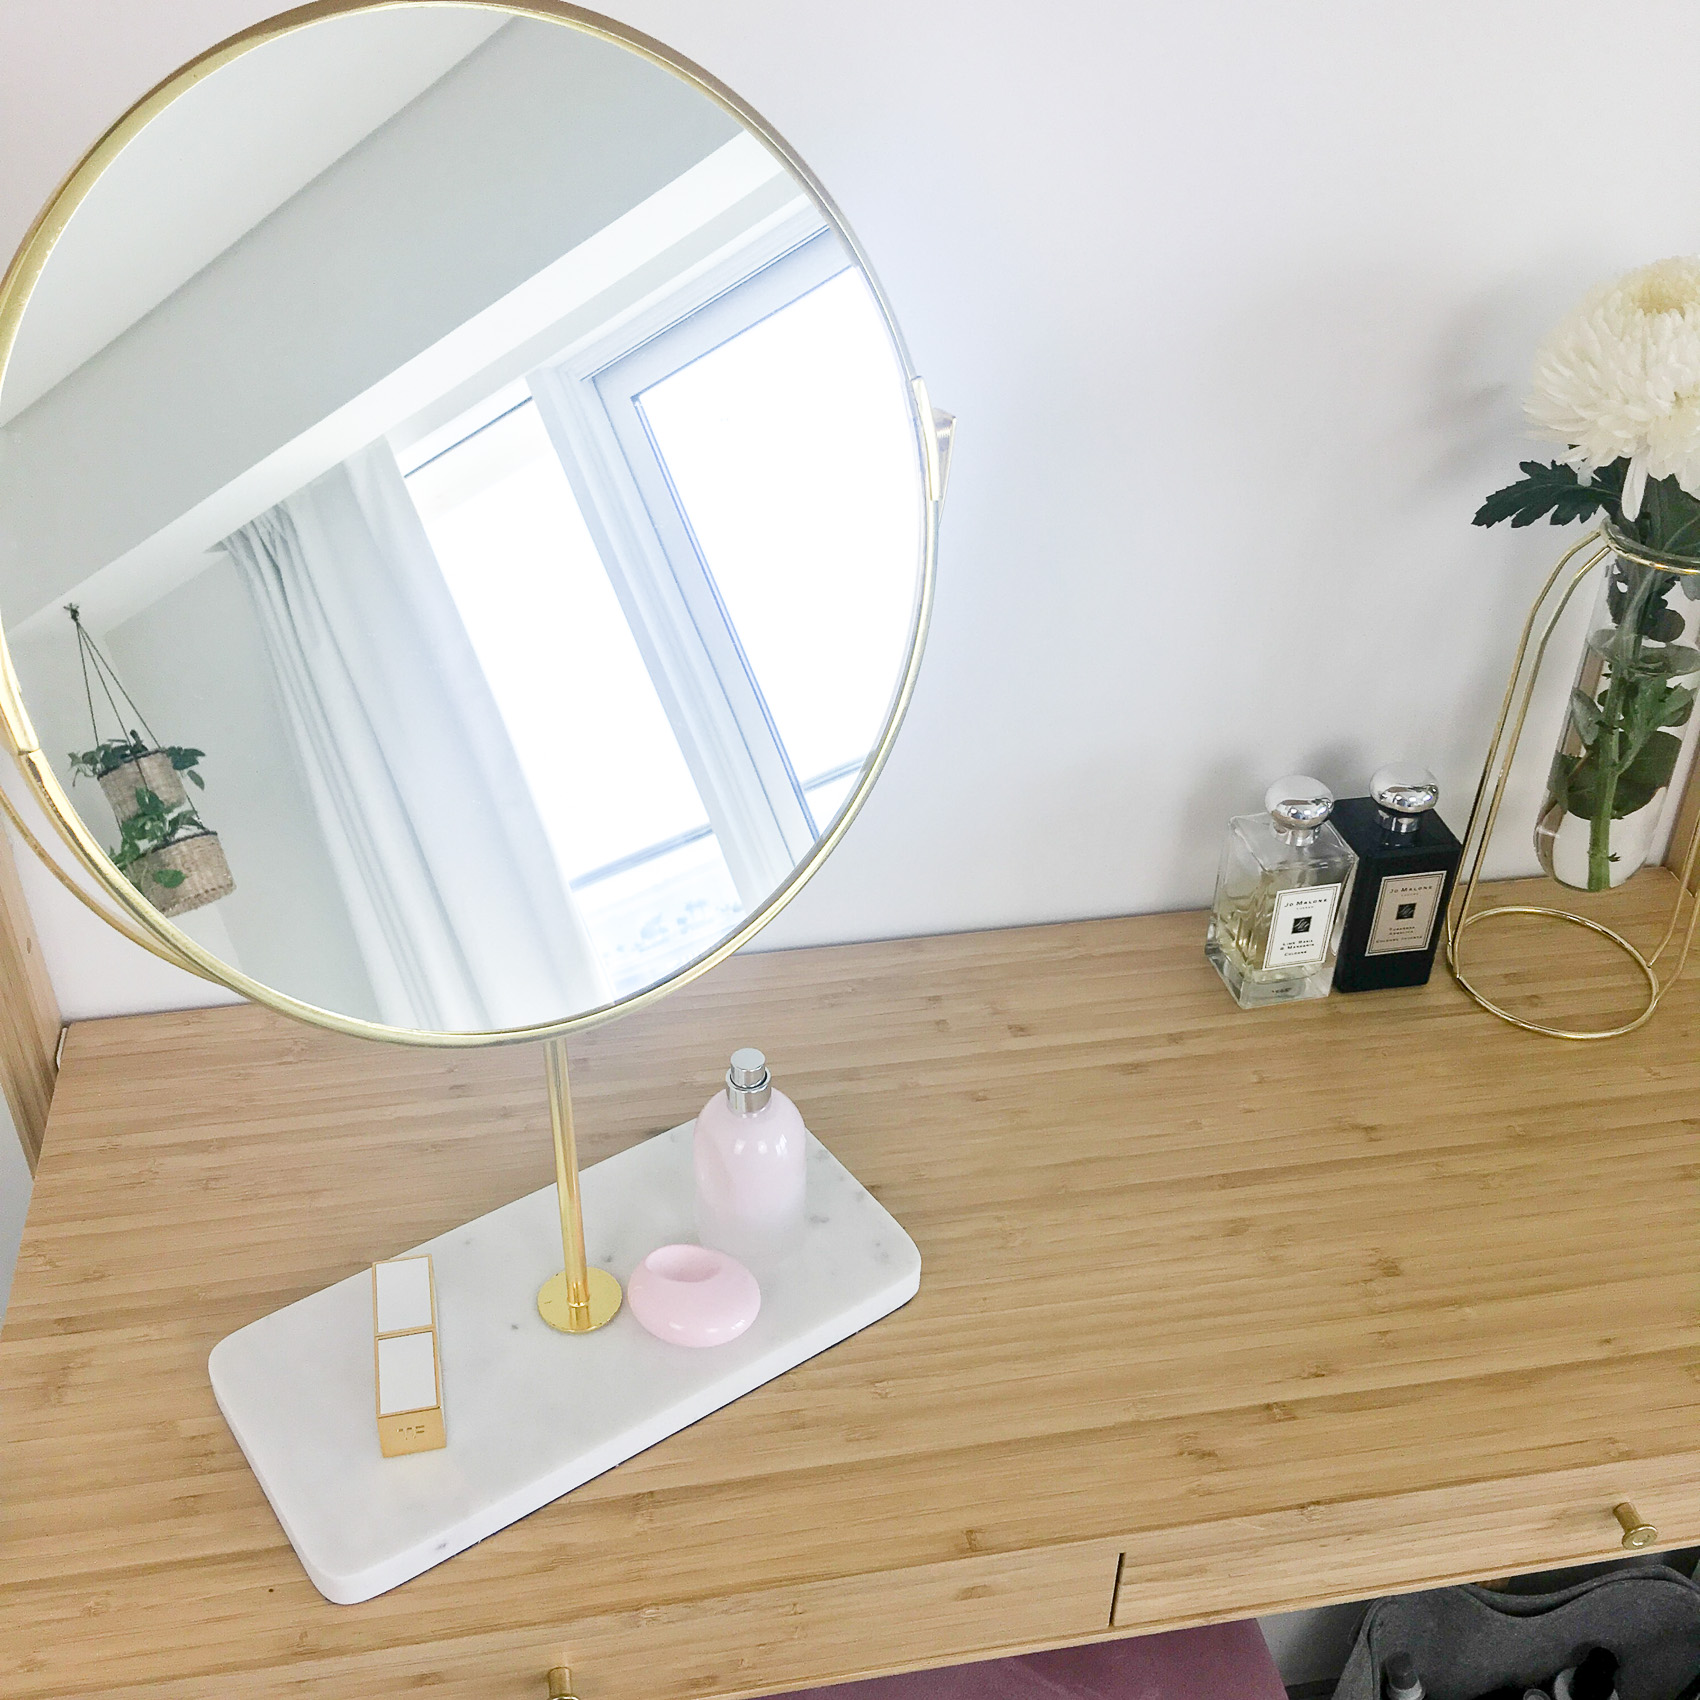 Ikea SVALNAS-Wall-mounted workspace combination bamboo -Zara Home FREE STANDING MIRROR WITH MARBLE BASE jo malone perfume glossier you